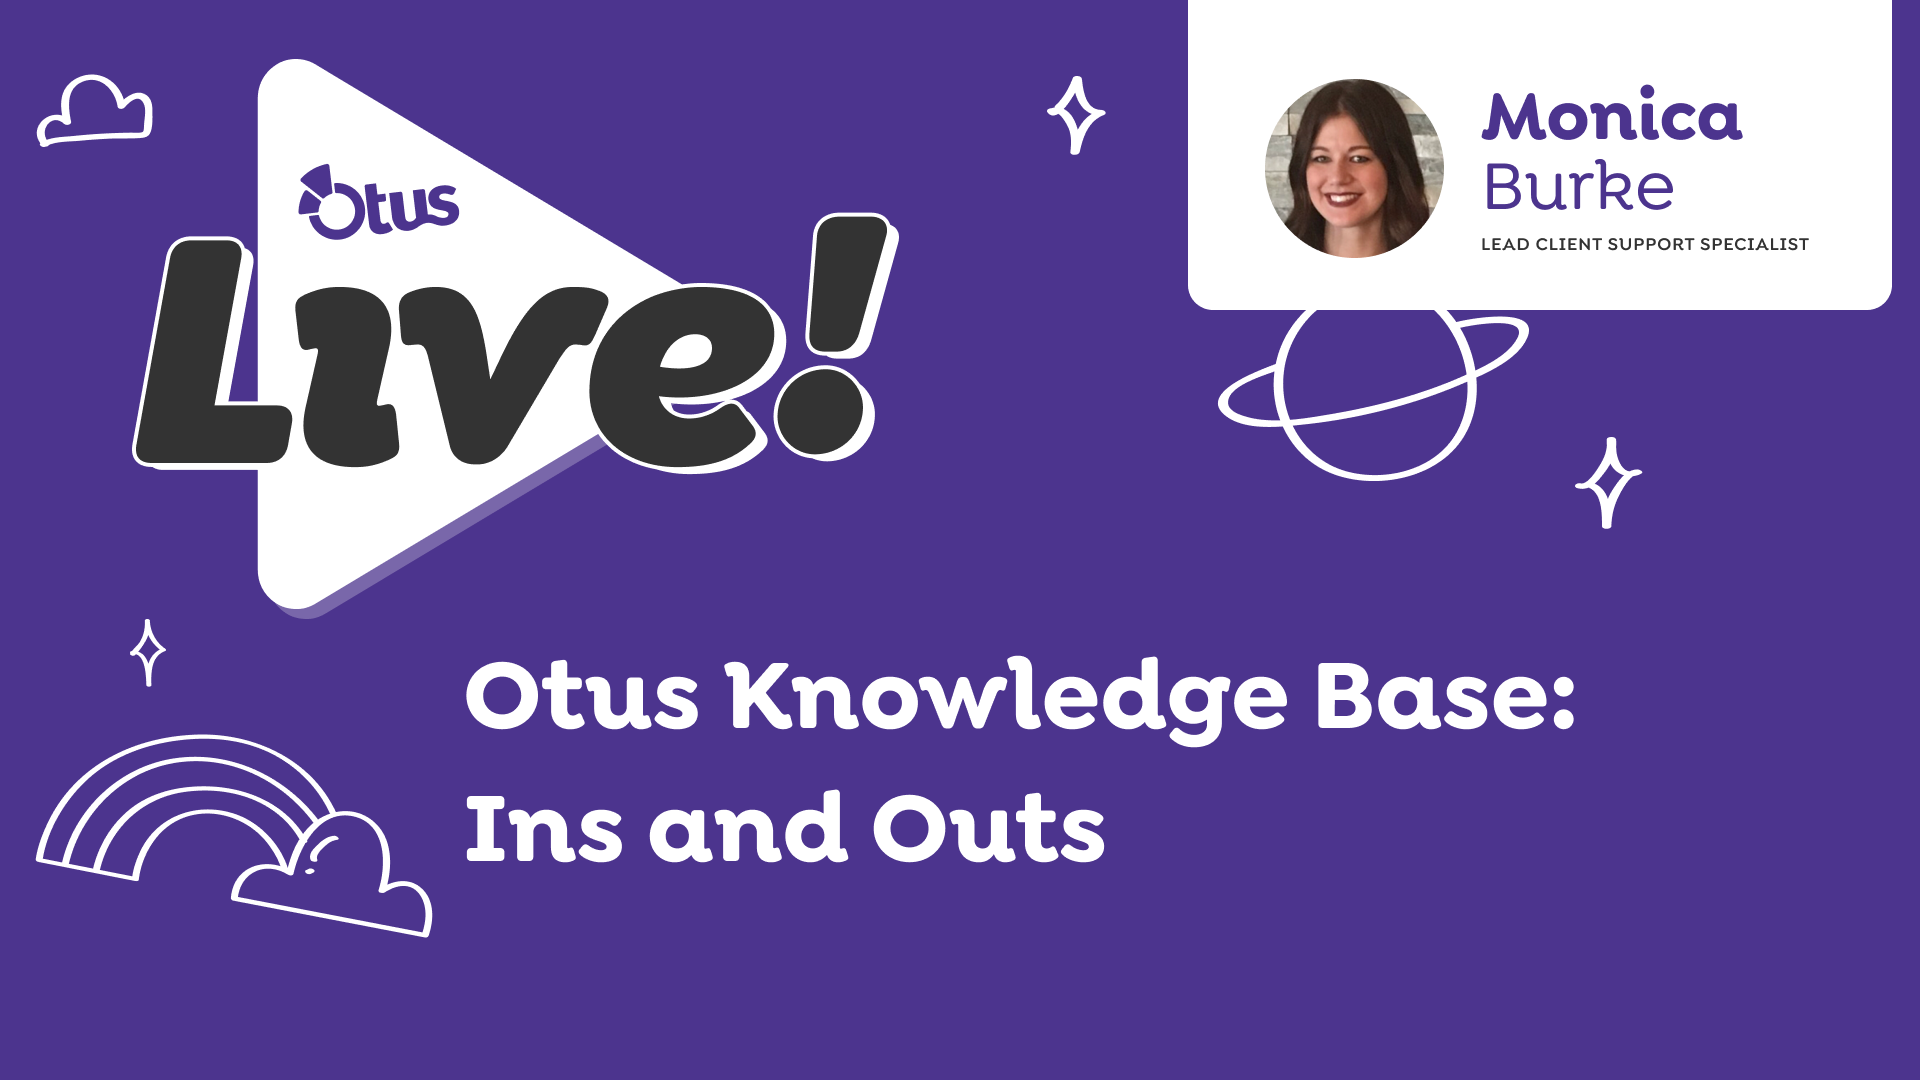 Otus Knowledge Base: Ins and Outs